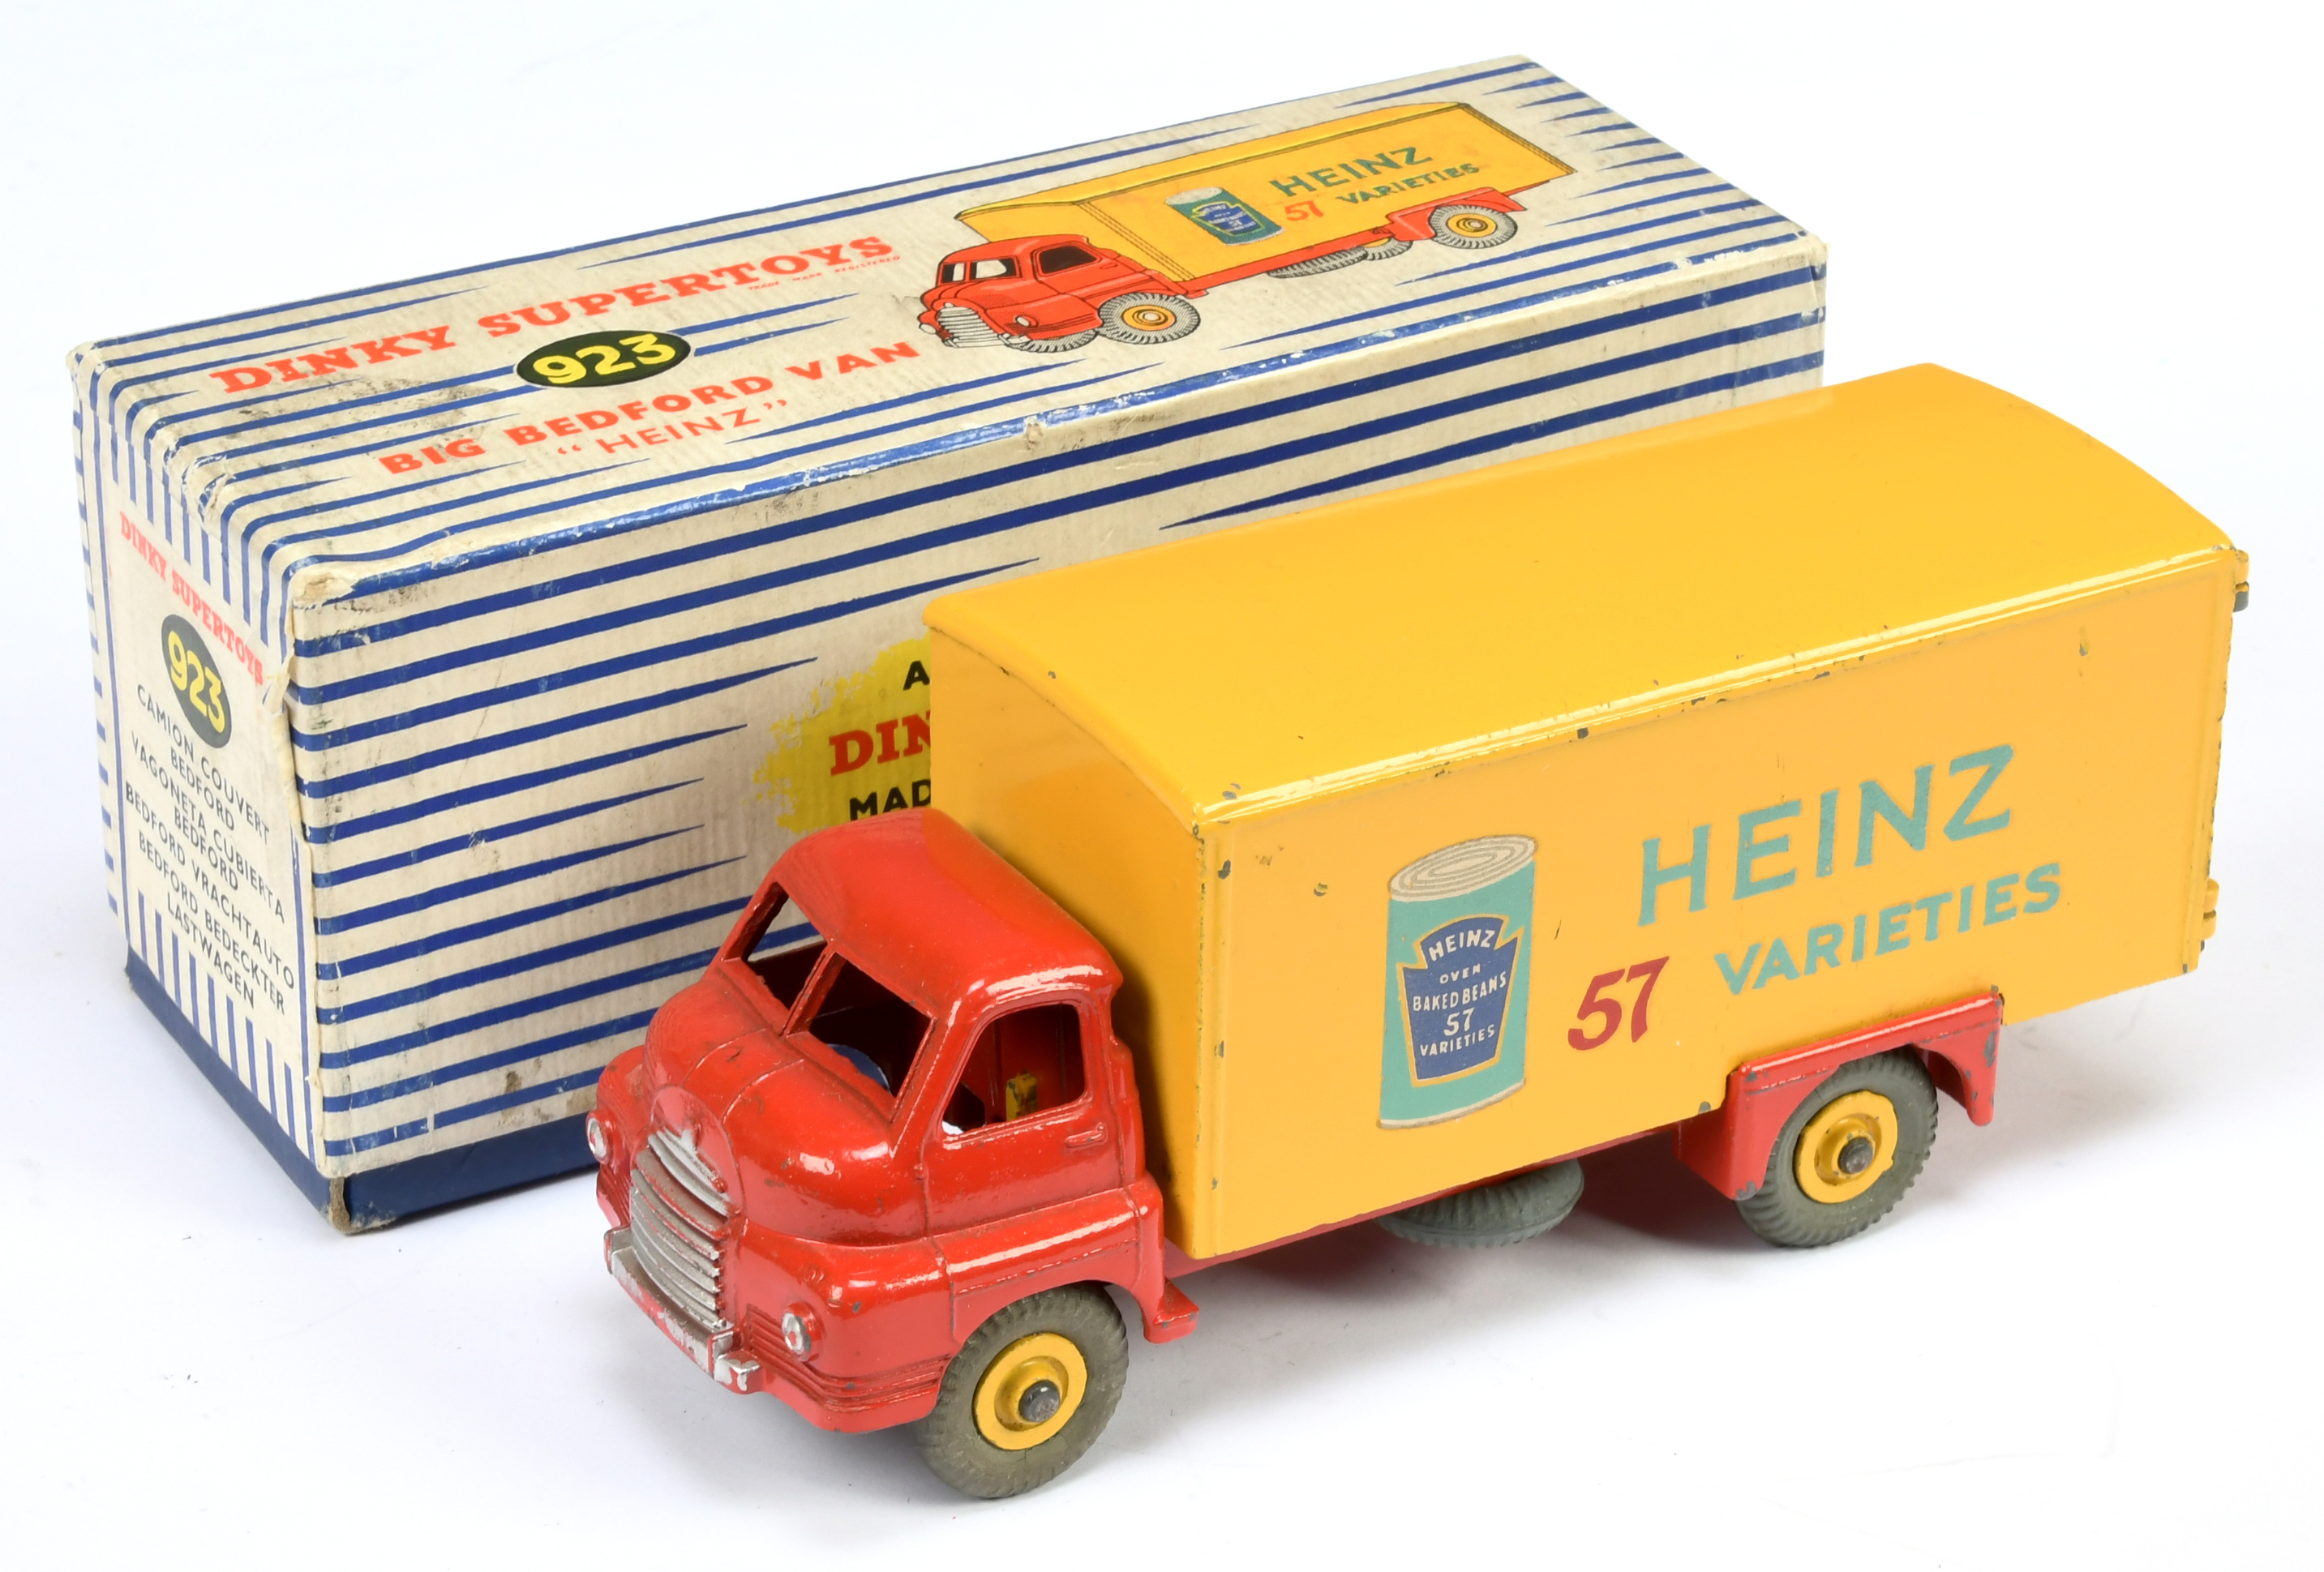 Dinky Toys 923 Big Bedford Van "Heinz 57 Varieties" - Red cab and chassis, yellow back and supert...